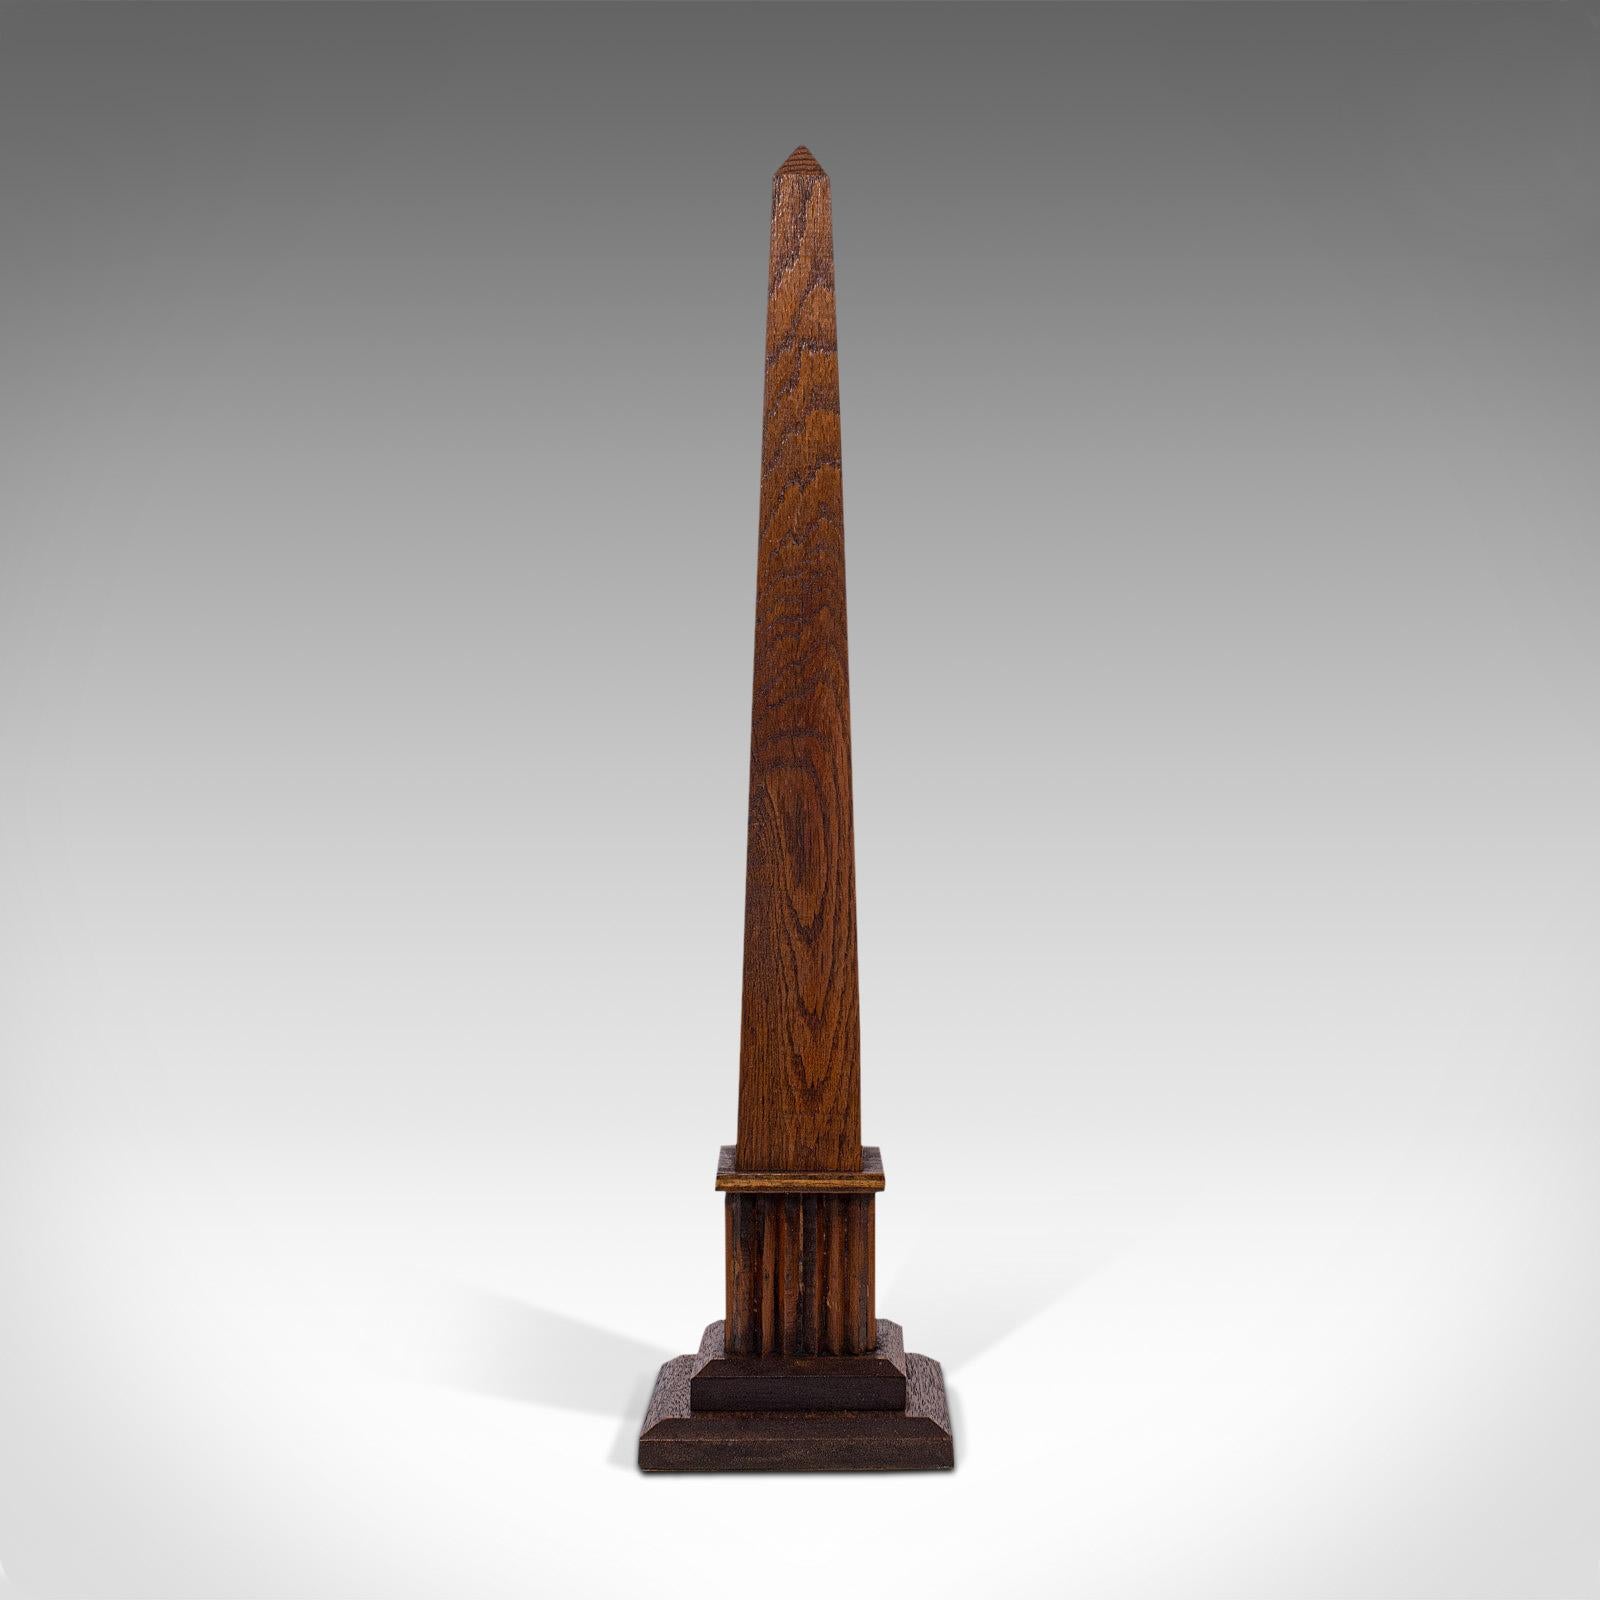 This is a tall antique decorative obelisk. An Italian, oak carved monolith or cenotaph, dating to the late 19th century, circa 1900.

Fascinating decorative piece from the days of the grand tour
Displaying a desirable aged patina and in good